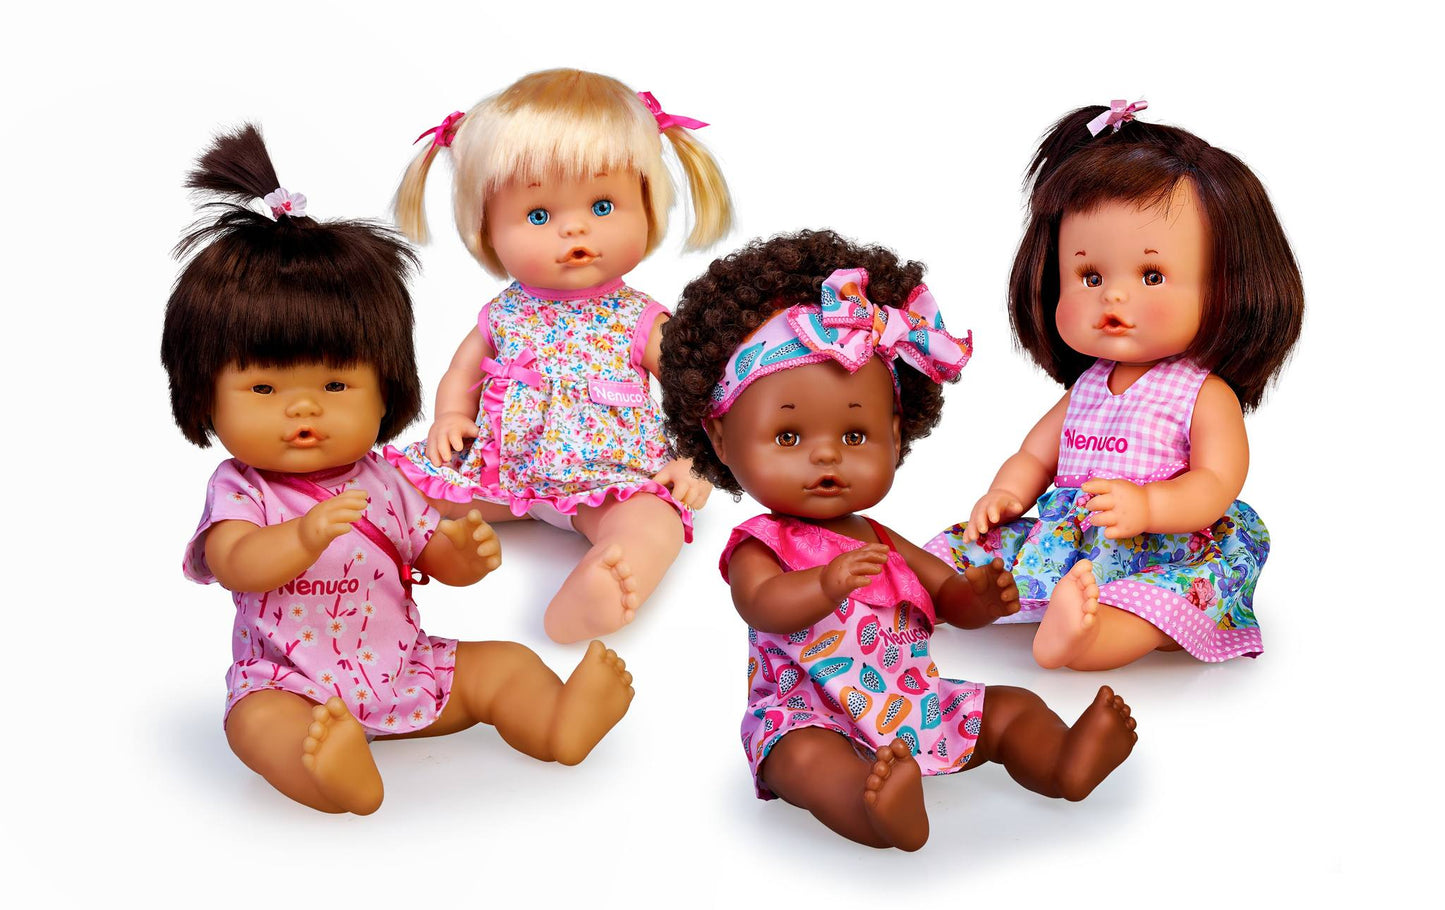 Nenucos of the World Latin Baby Doll - Light Skin Tone with Brown Eyes, 12" Doll